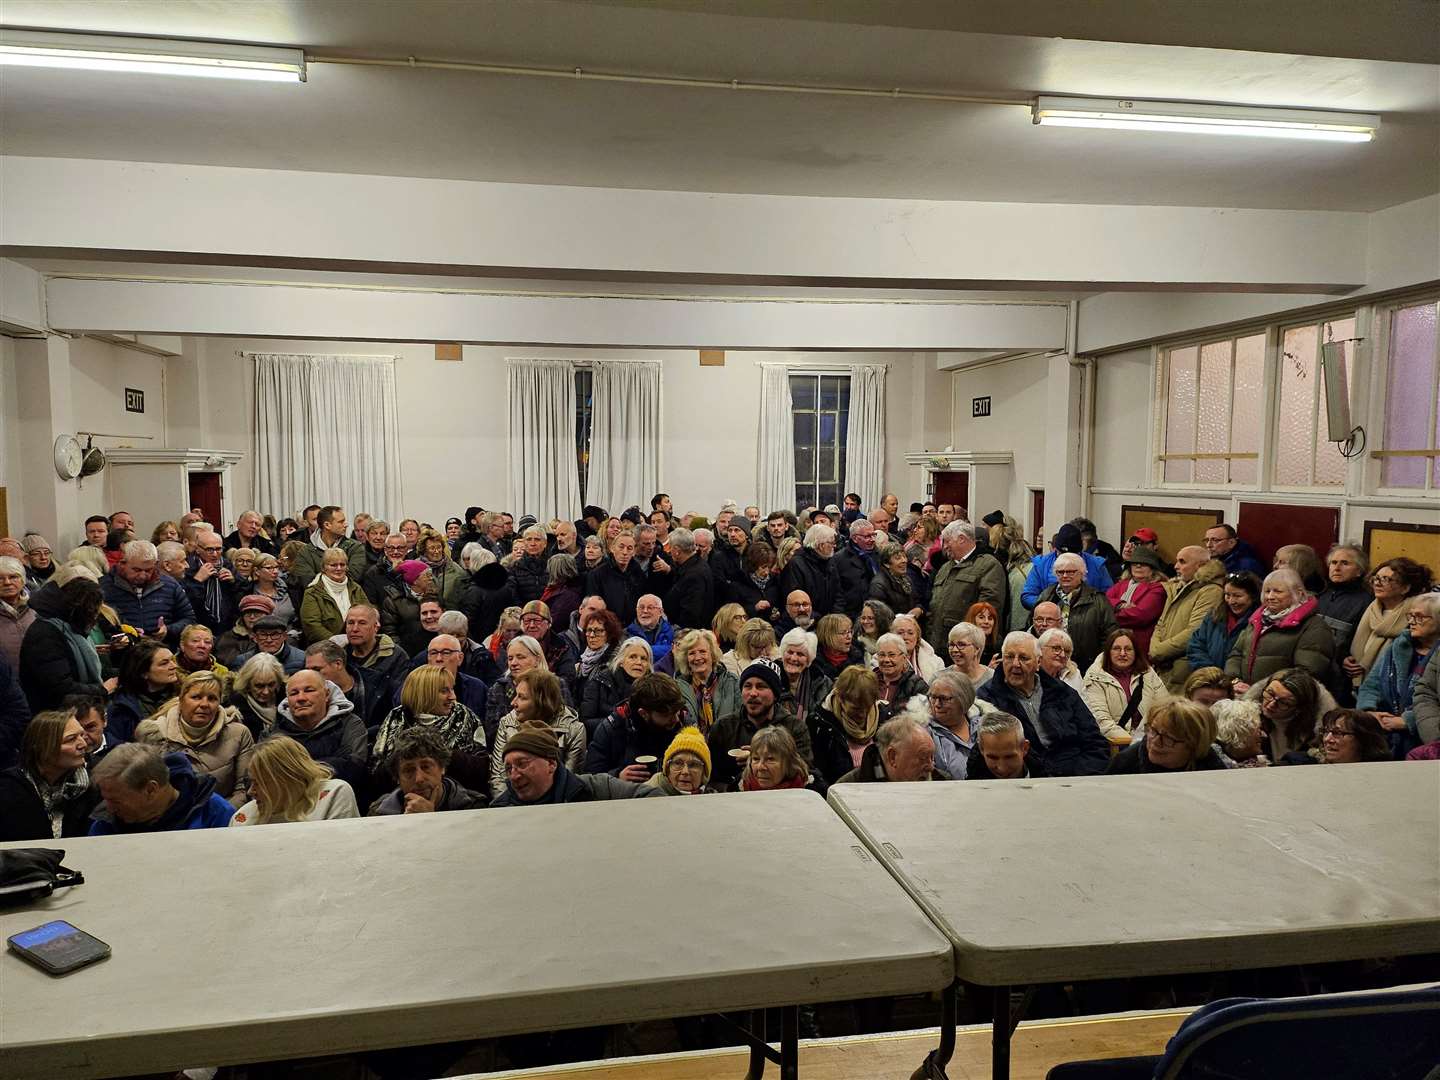 A view of the packed United Reform Church hall in Herne Bay from the perspective of the speakers